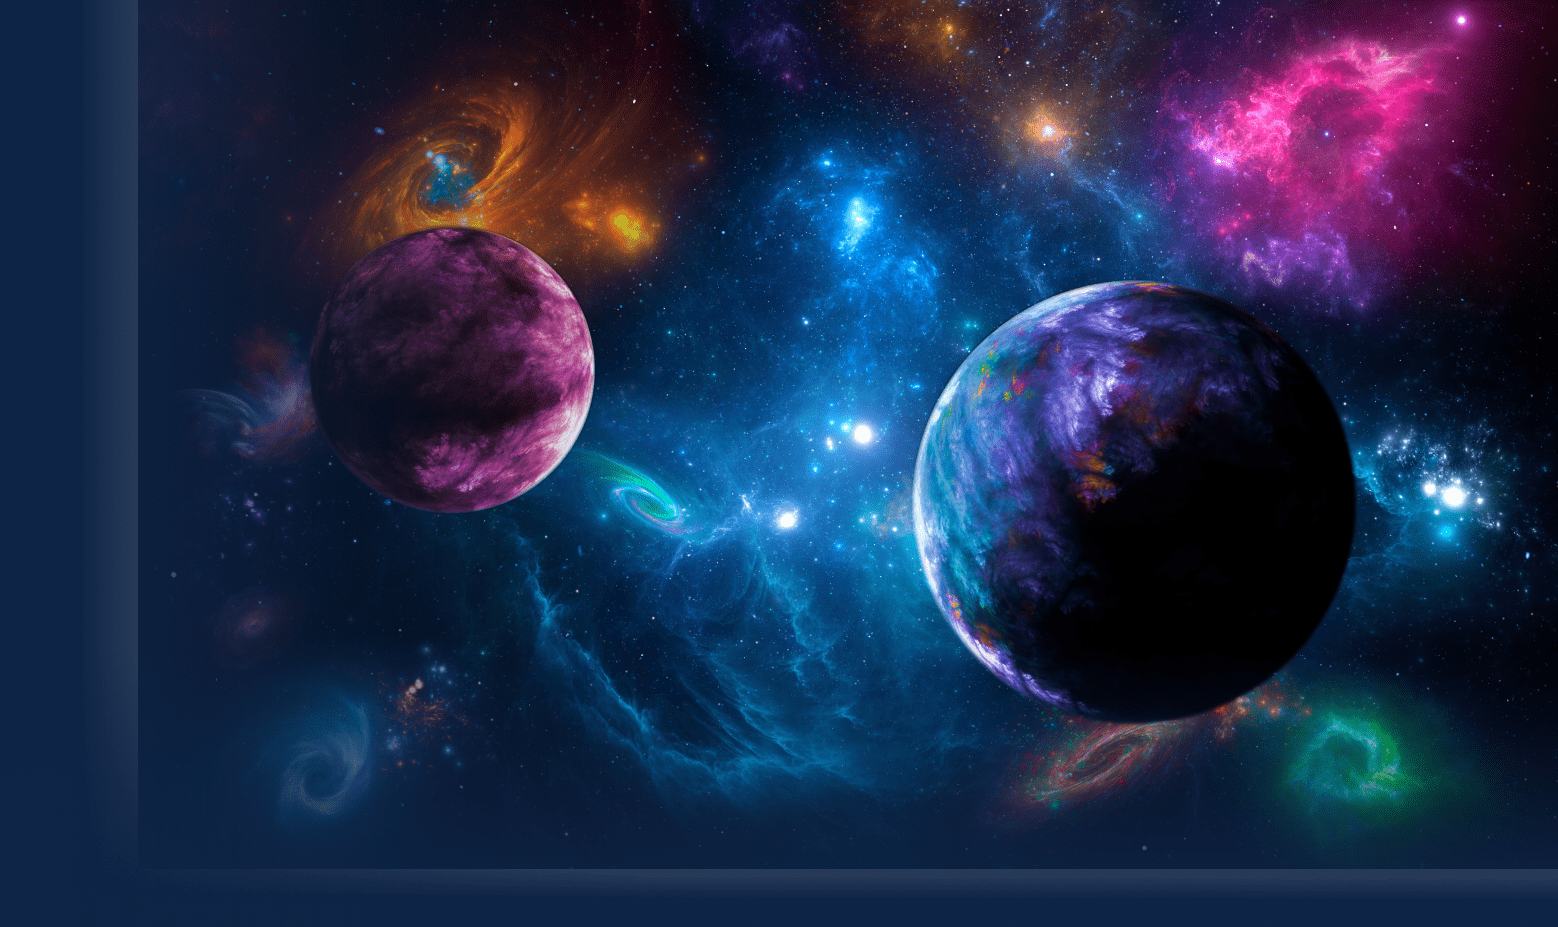 Space scene with planets, stars and galaxies.